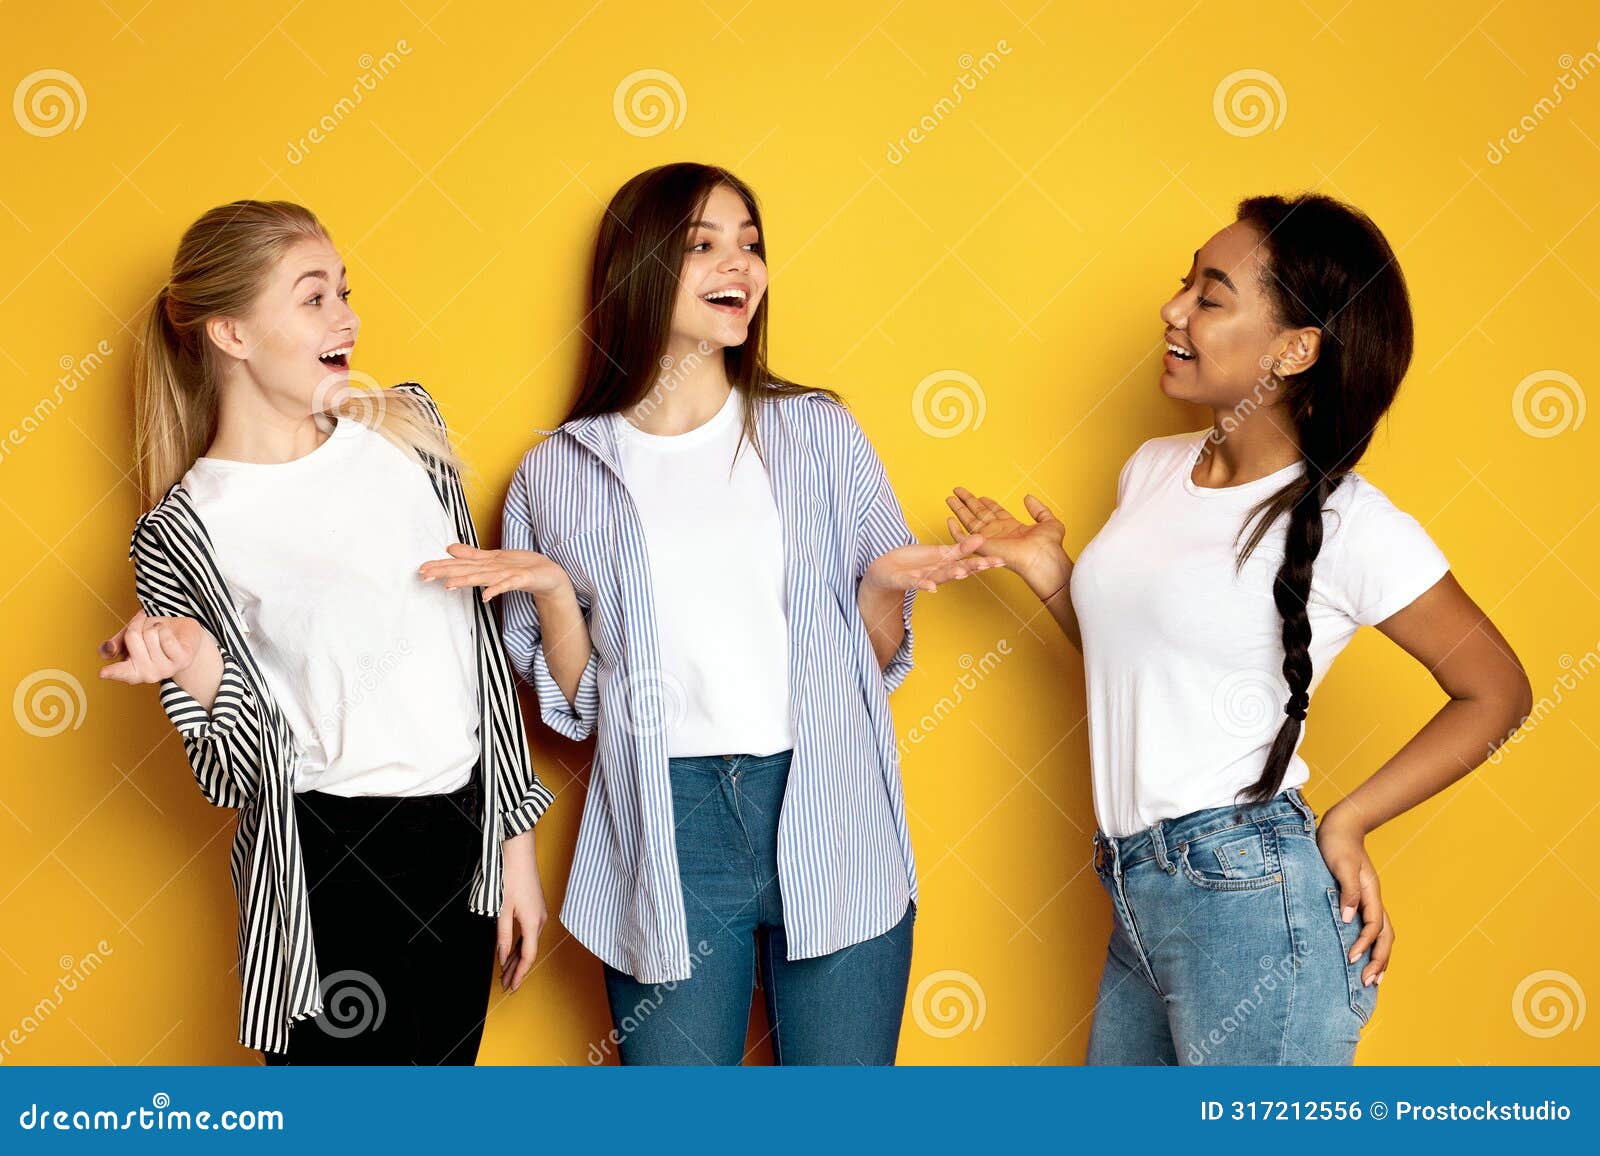 three girls engaging in lively conversation against vibrant yellow background